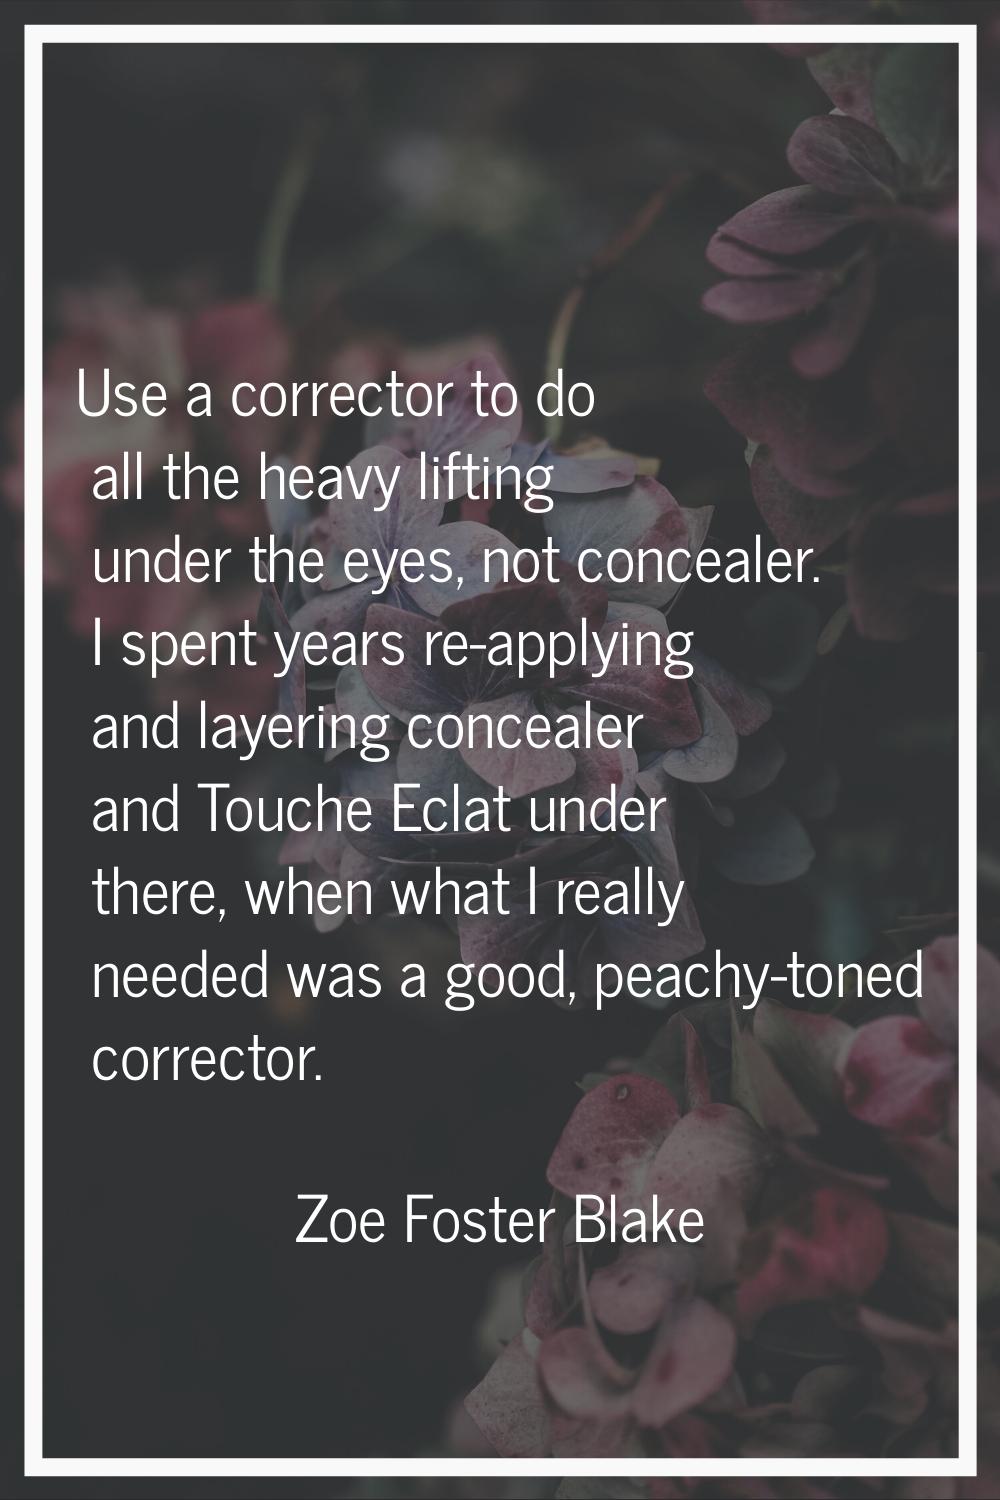 Use a corrector to do all the heavy lifting under the eyes, not concealer. I spent years re-applyin